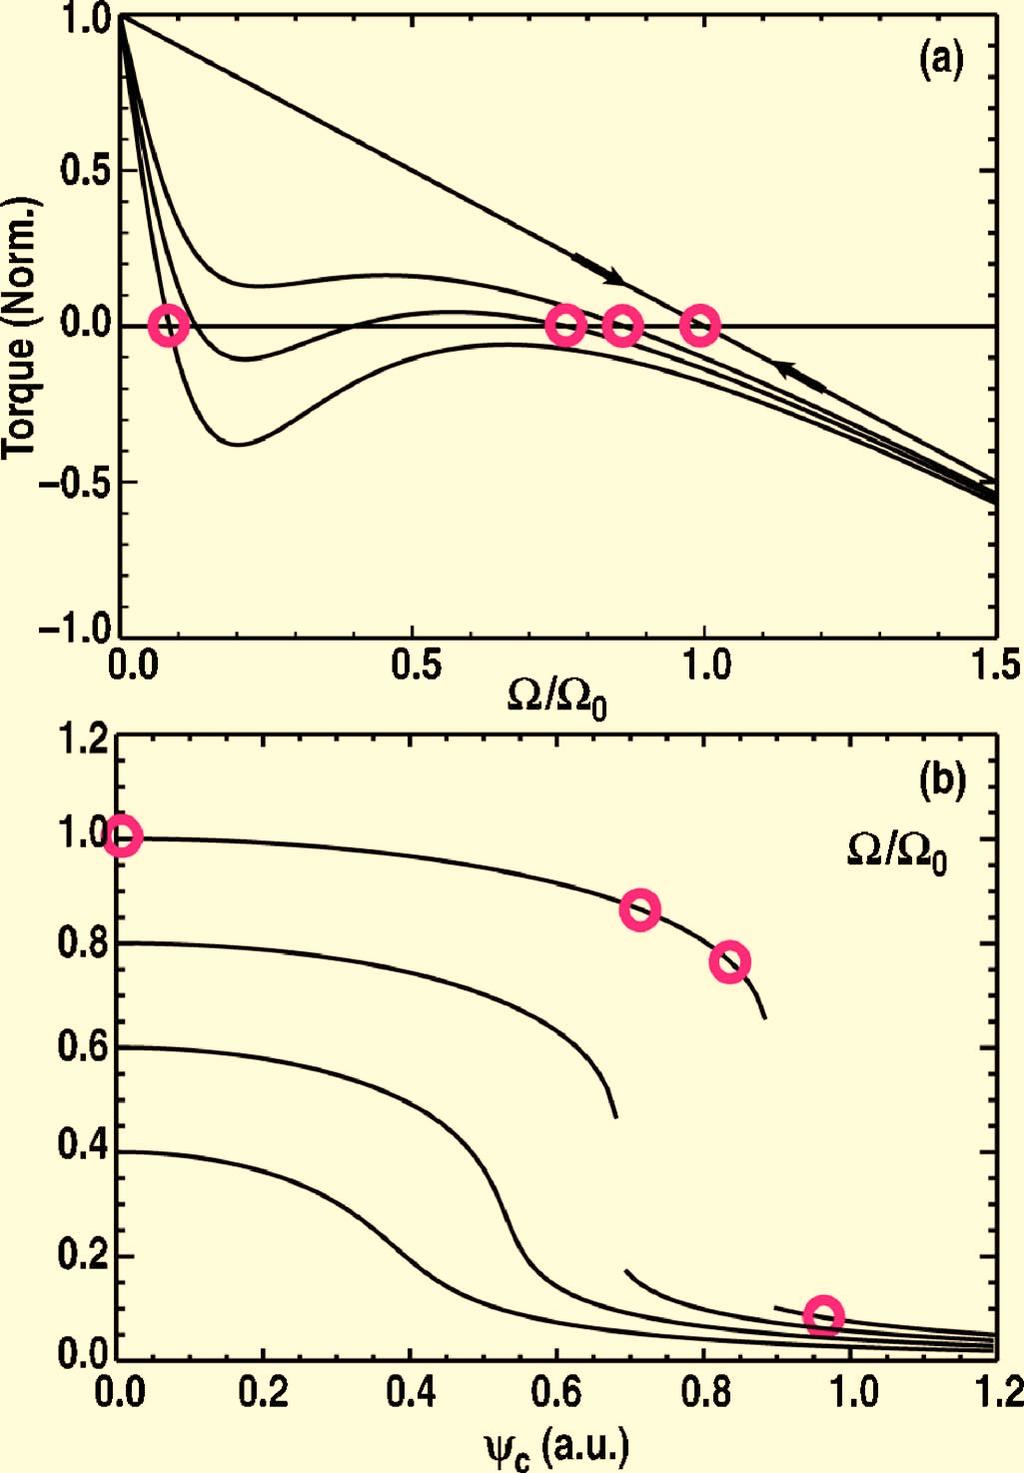 056101-6 Strait et al. Phys. Plasmas 14, 056101 2007 torque and little or no magnetic braking should be able to reach the expected MHD stability boundary at crit.